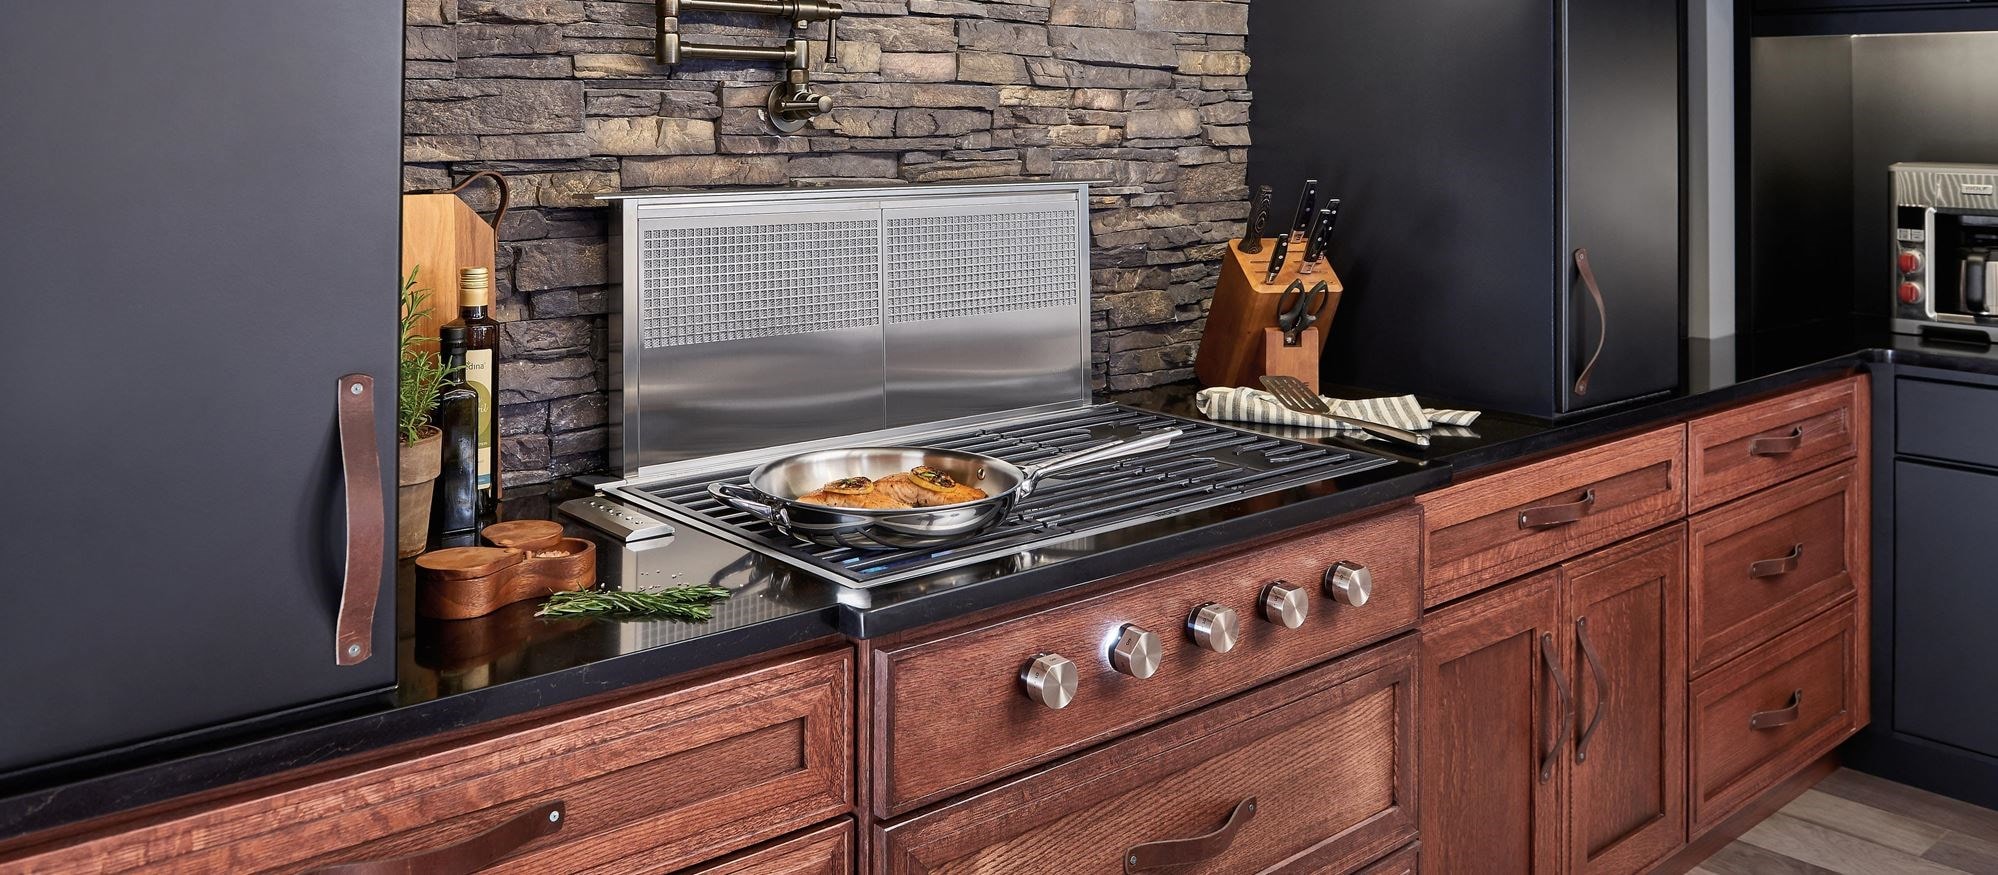 https://www.subzero-wolf.com/wolf/cooktops-and-rangetops/-/media/images/united-states/widen/product-heroes/md_cg365c_s_dd36_tcs_050718.jpg?h=875&width=2000&udi=1&cropregion=80,1140,4955,3275